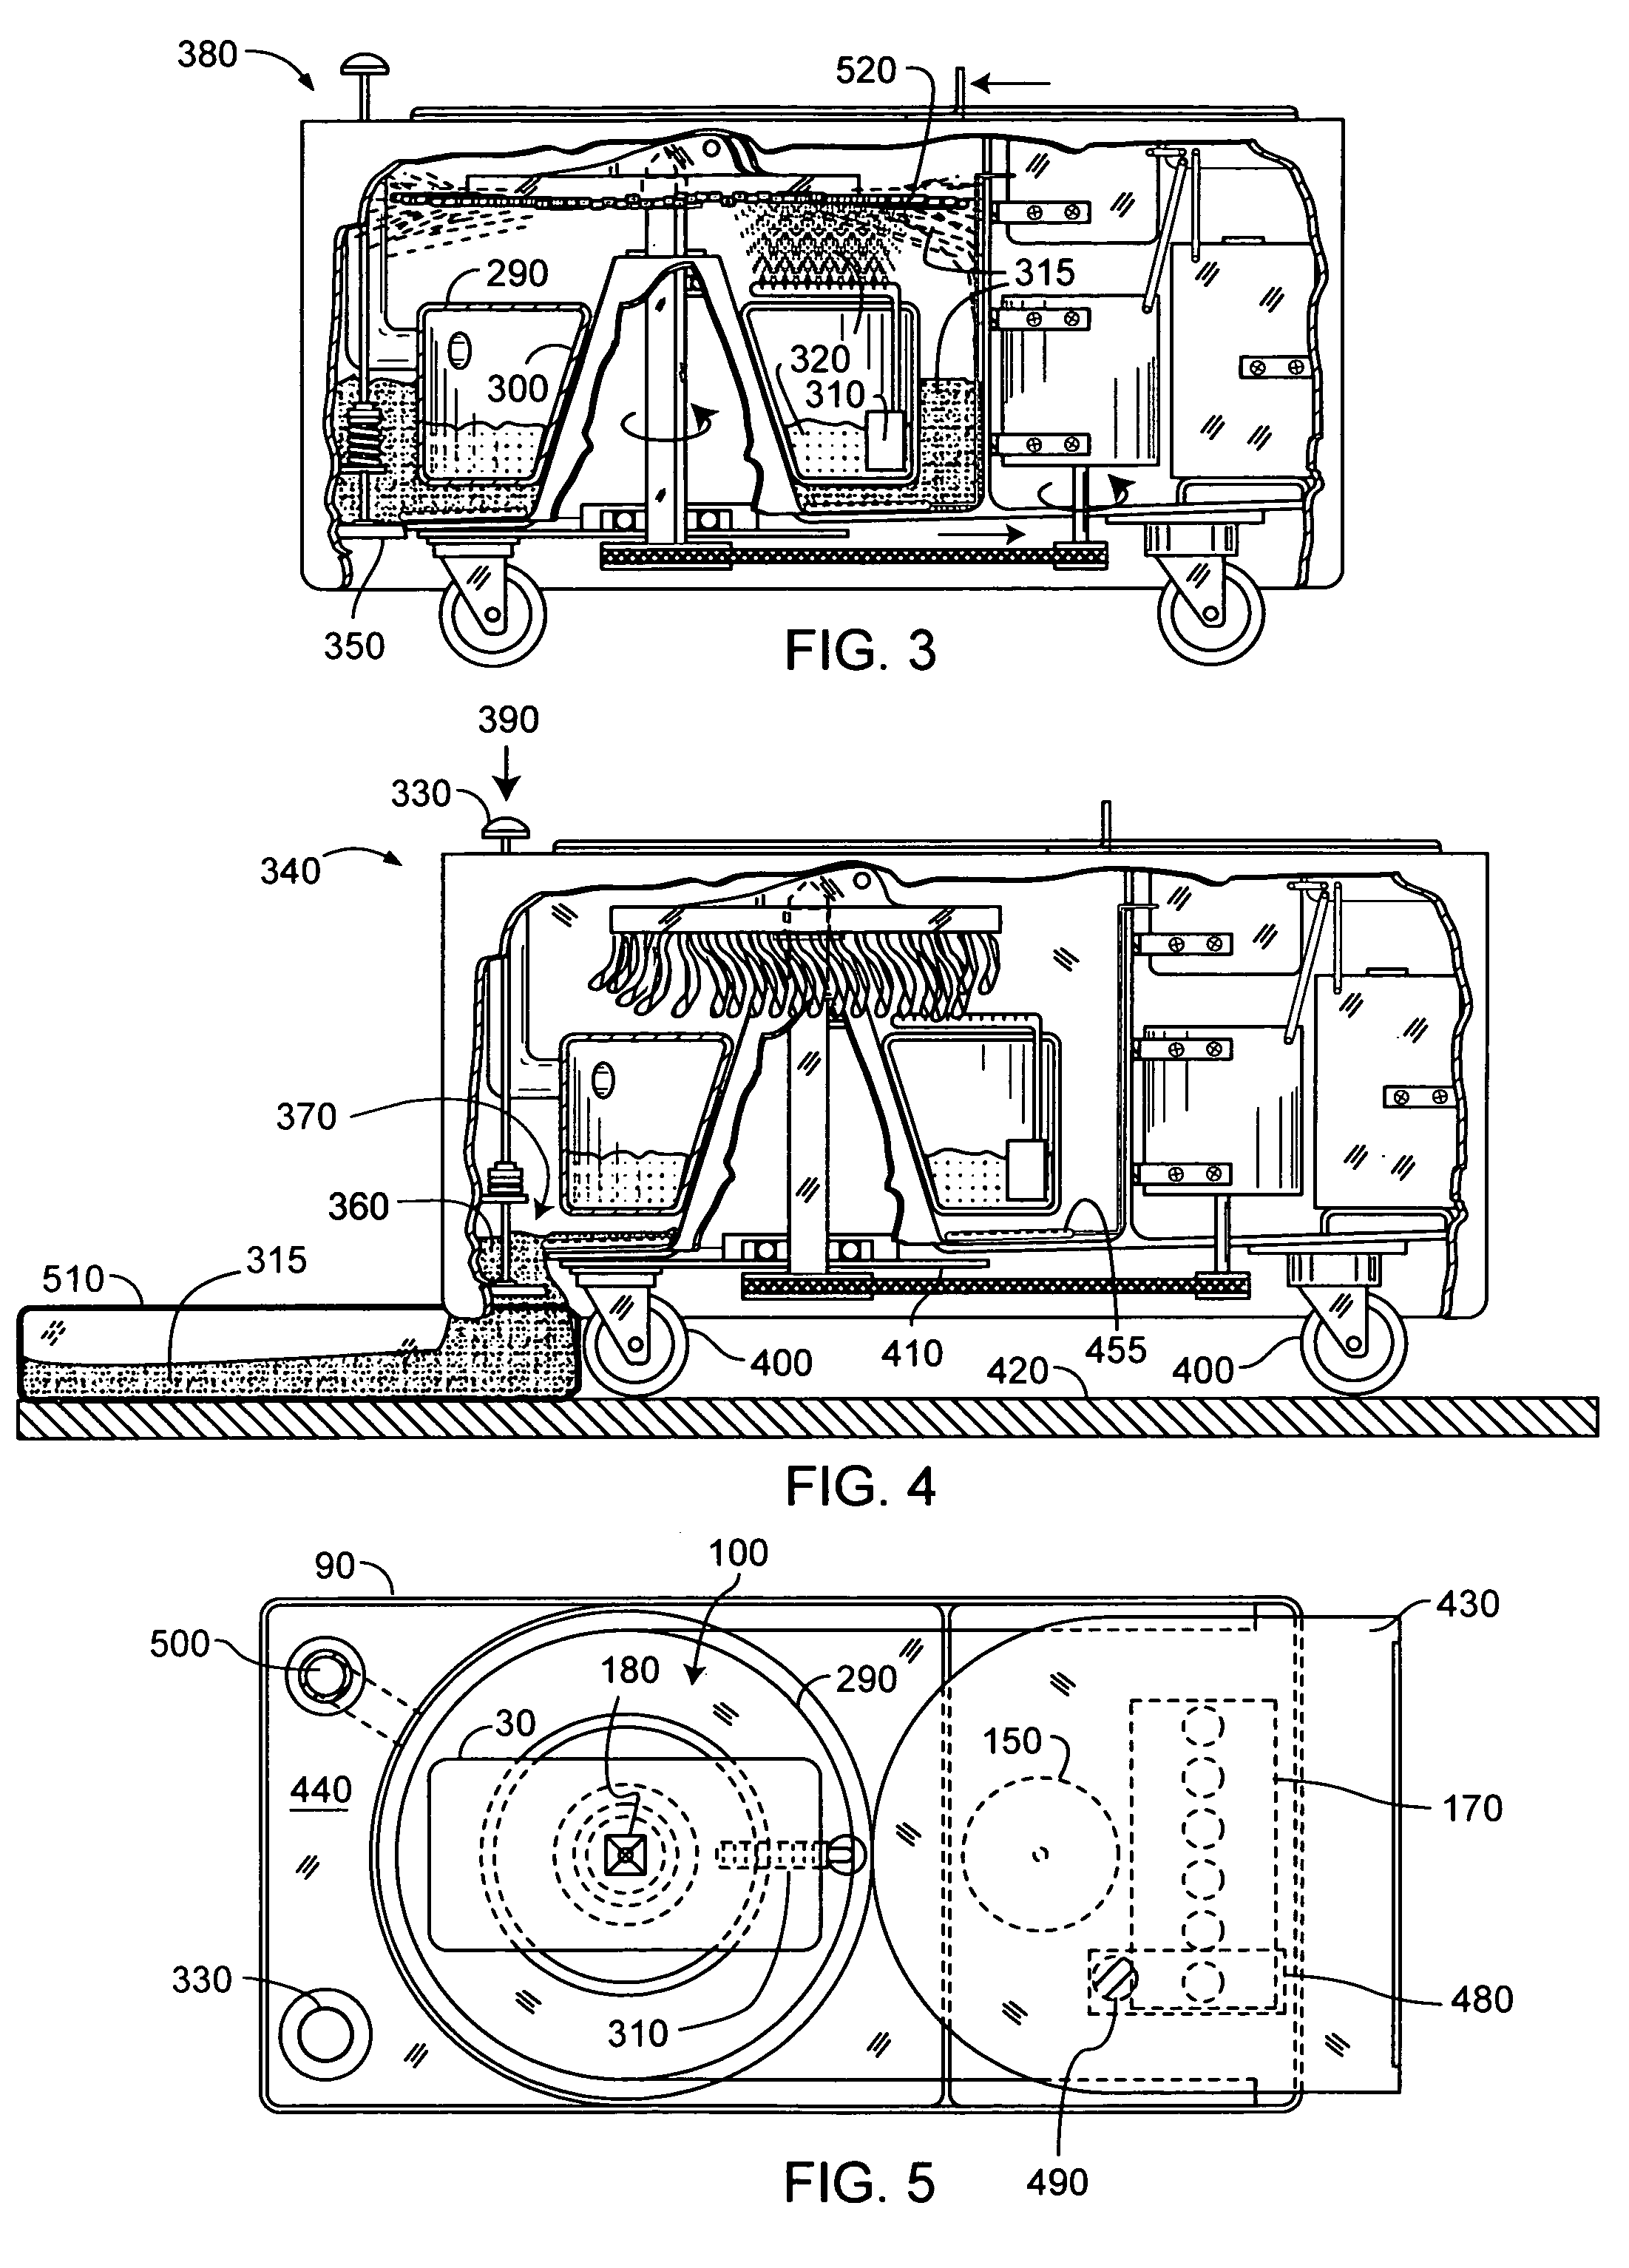 Mopping system and method of use